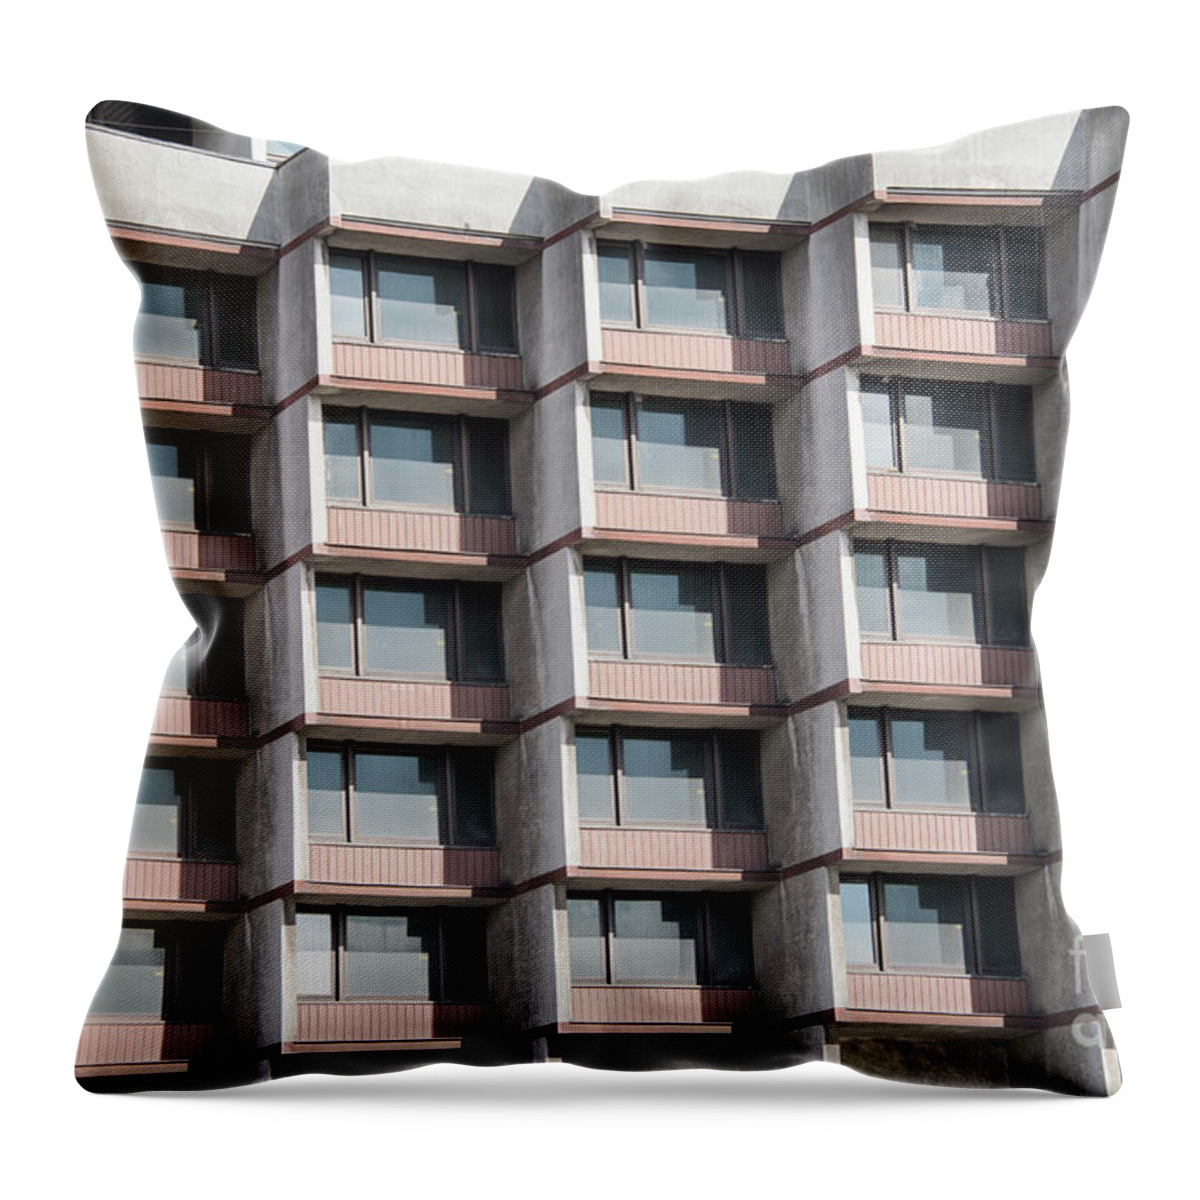 Abstract Throw Pillow featuring the photograph Brutalist Architecture by Juli Scalzi